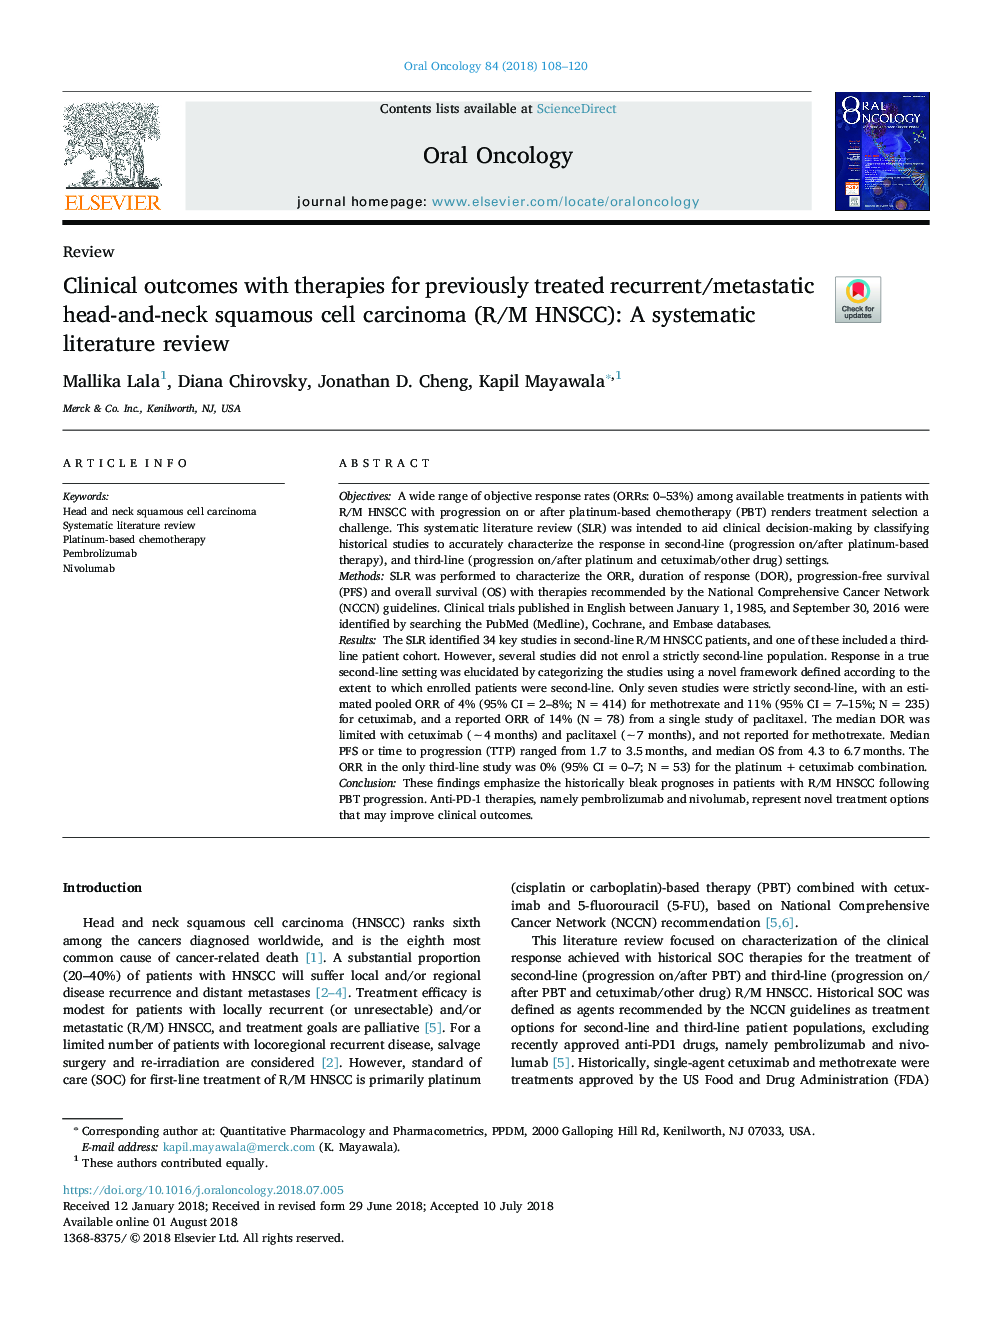 Clinical outcomes with therapies for previously treated recurrent/metastatic head-and-neck squamous cell carcinoma (R/M HNSCC): A systematic literature review